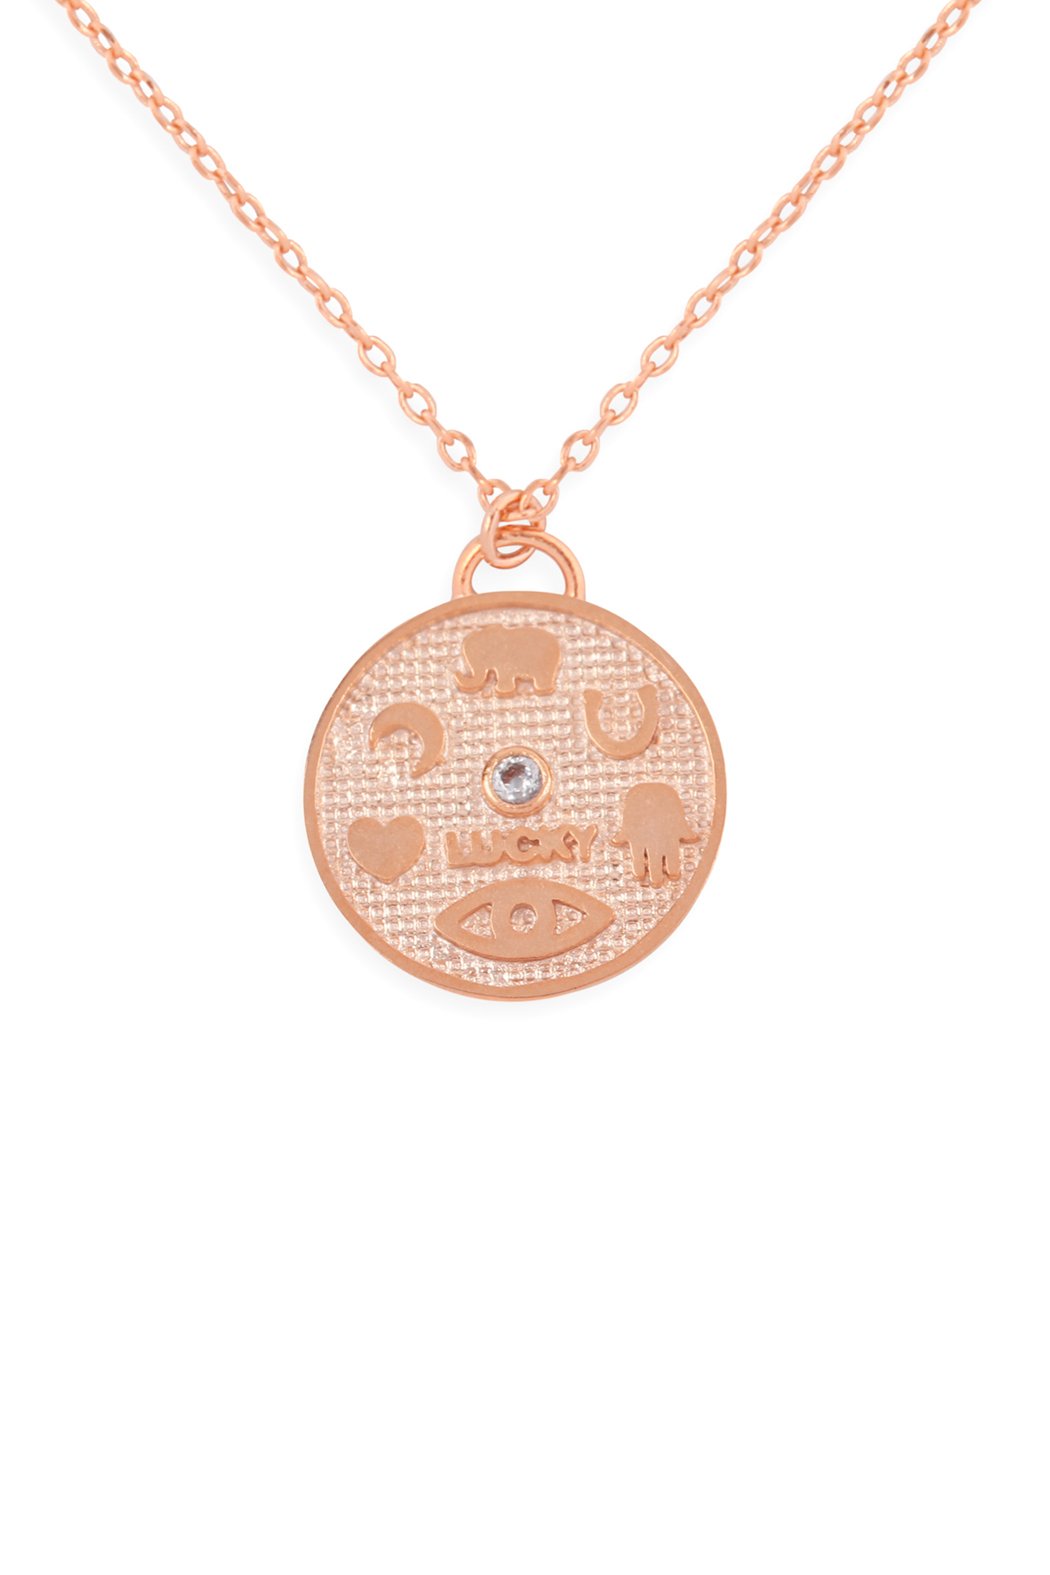 Hdnfn353 - Cast Round Pendant Necklace - LOLA LUXE